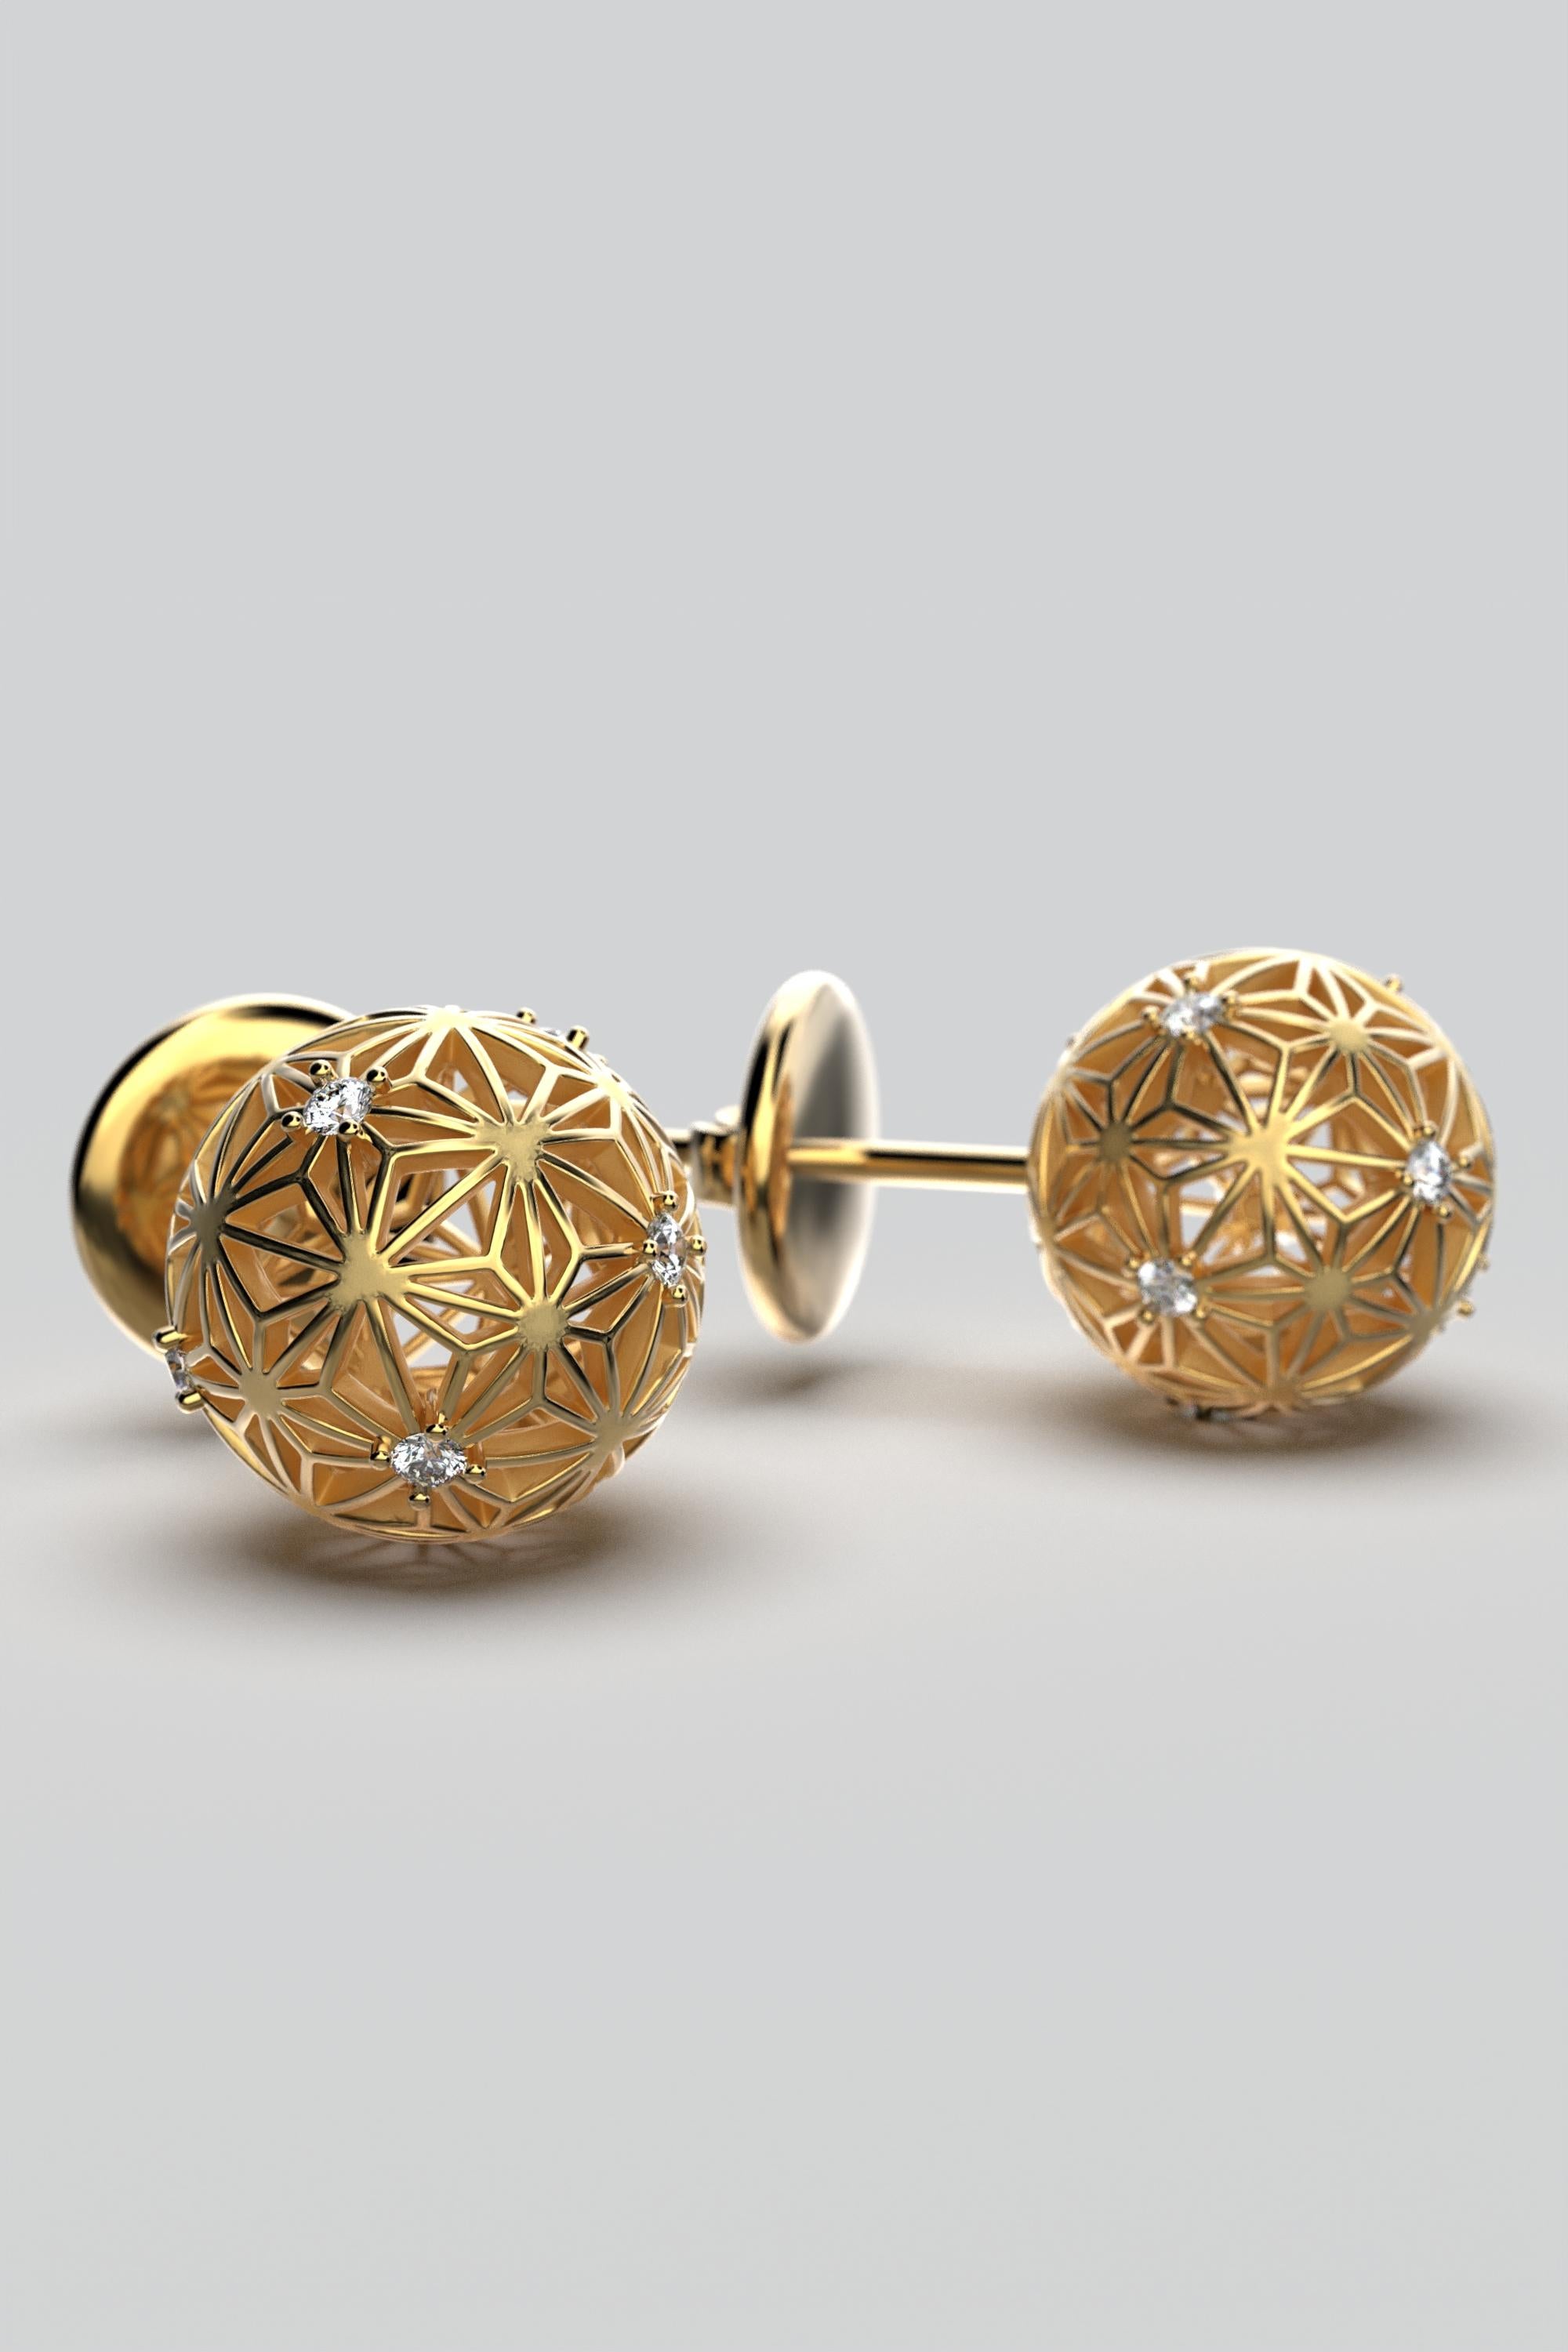 Oltremare Gioielli Diamond Stud Earrings in 18k Gold Made in Italy  In New Condition For Sale In Camisano Vicentino, VI